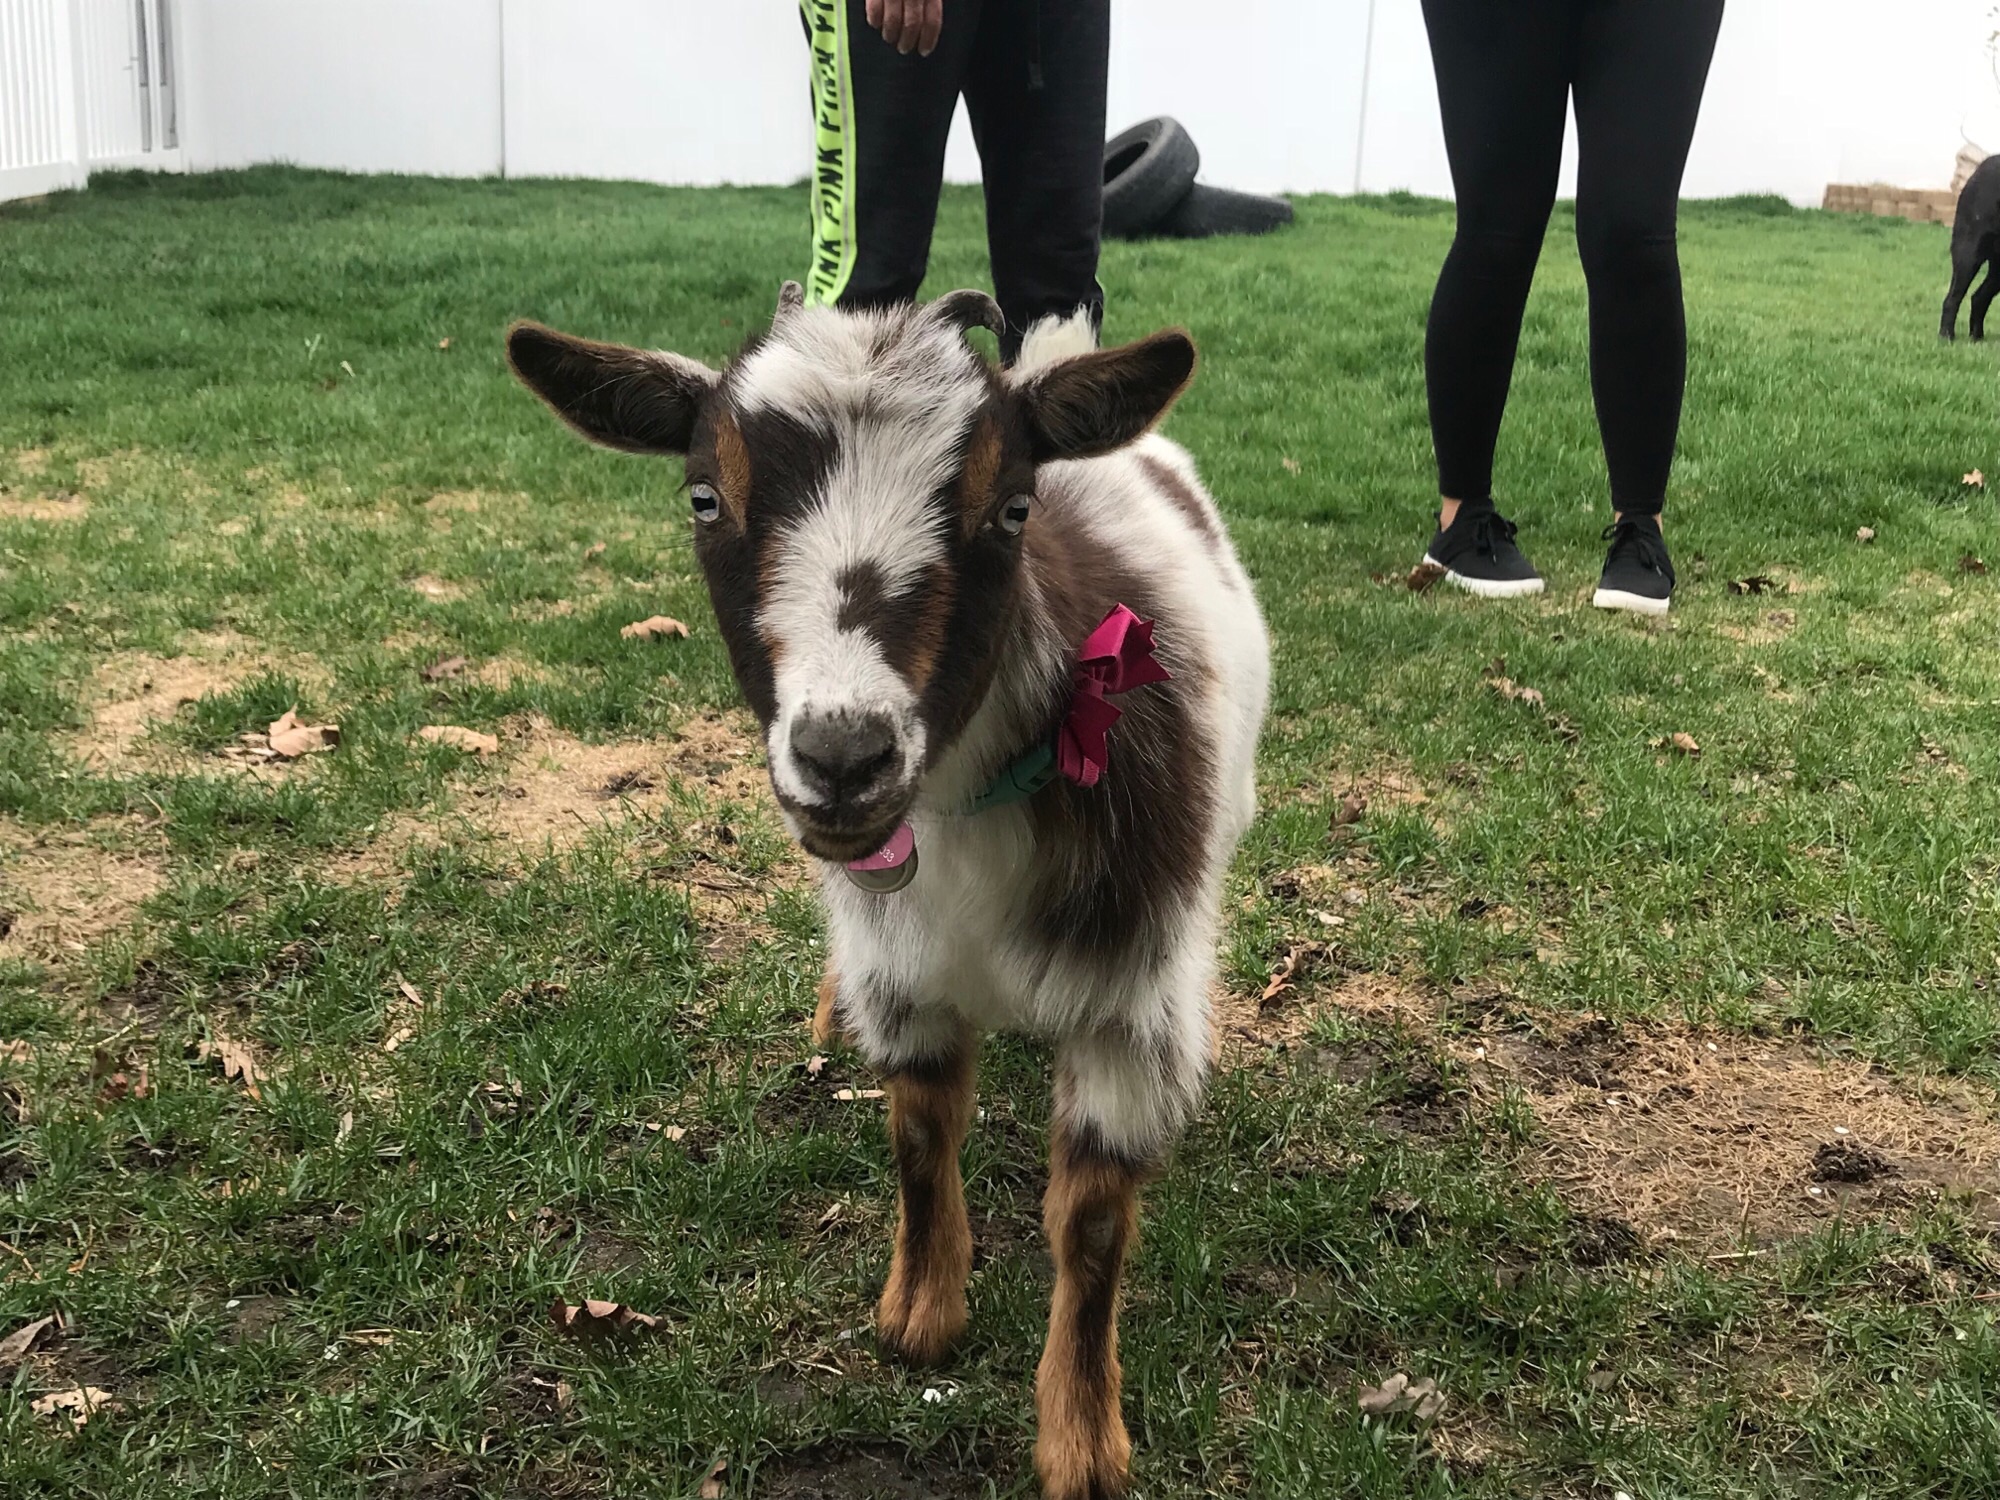 Pet owner told 'goat must go,' city policy up for debate in ...